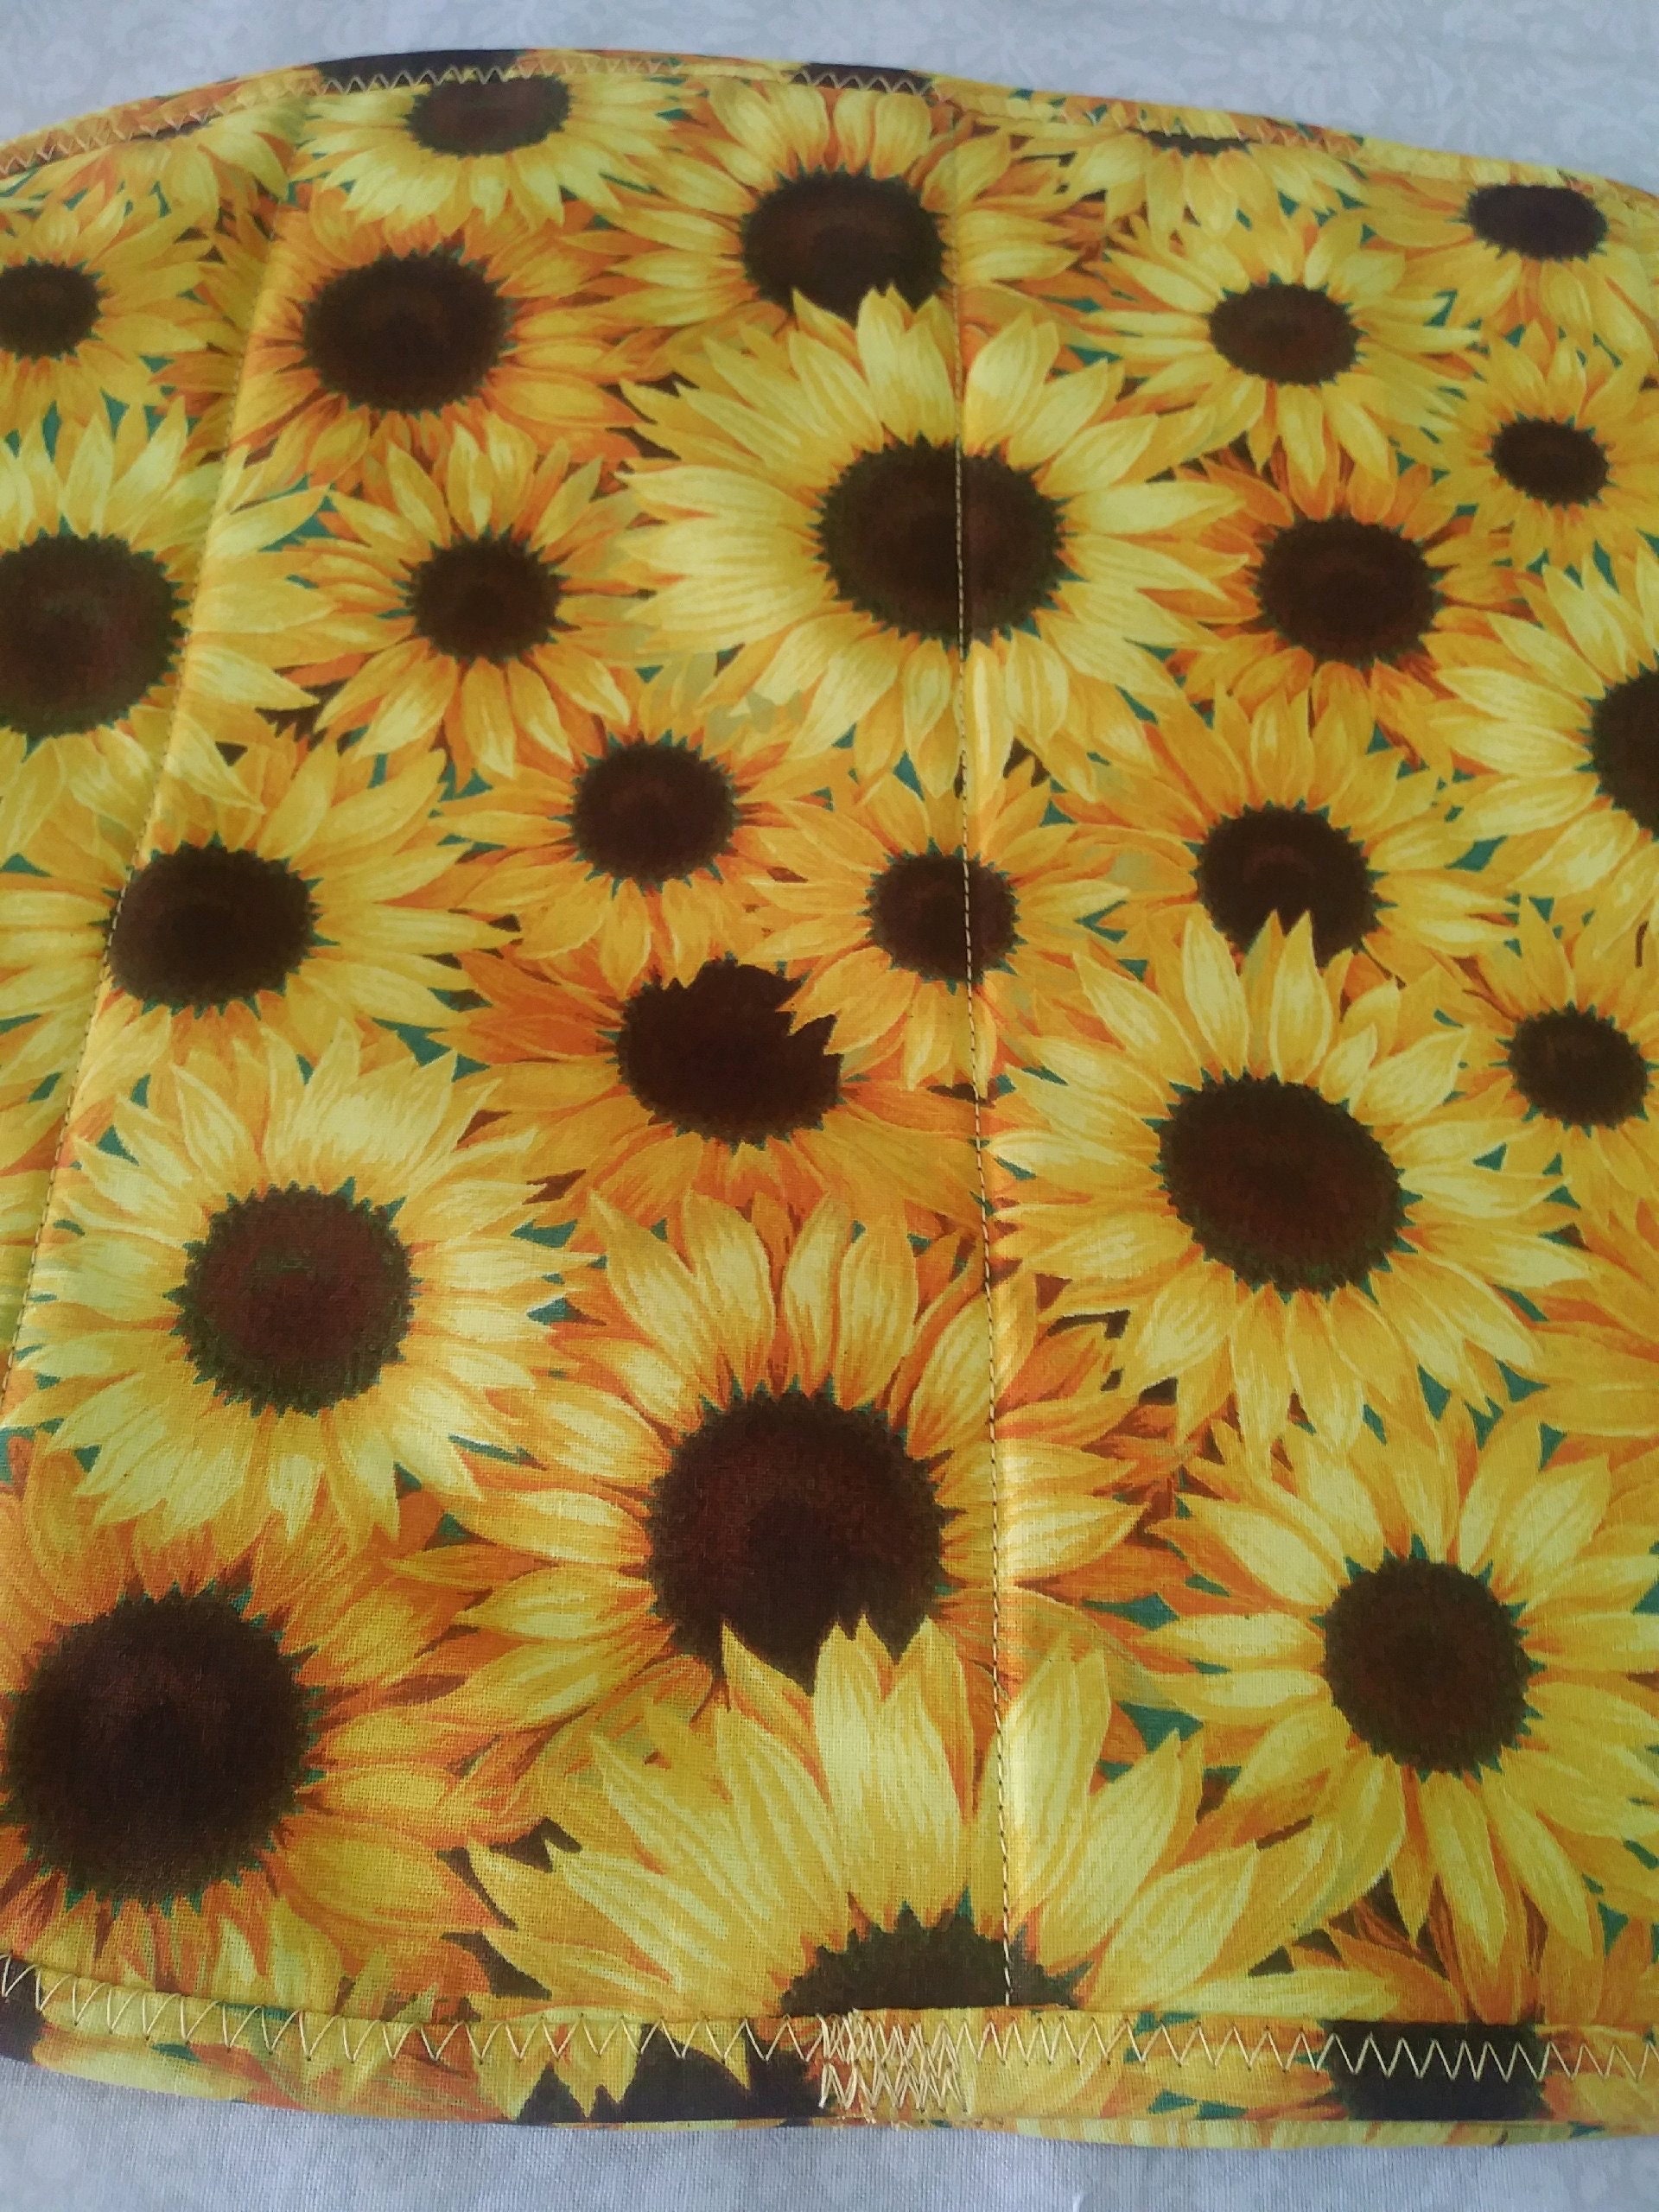 Rubber Sunflowers Grey Wood Fence Sink Counter Mat Pebble Placemat 15.5 x  12 NWT